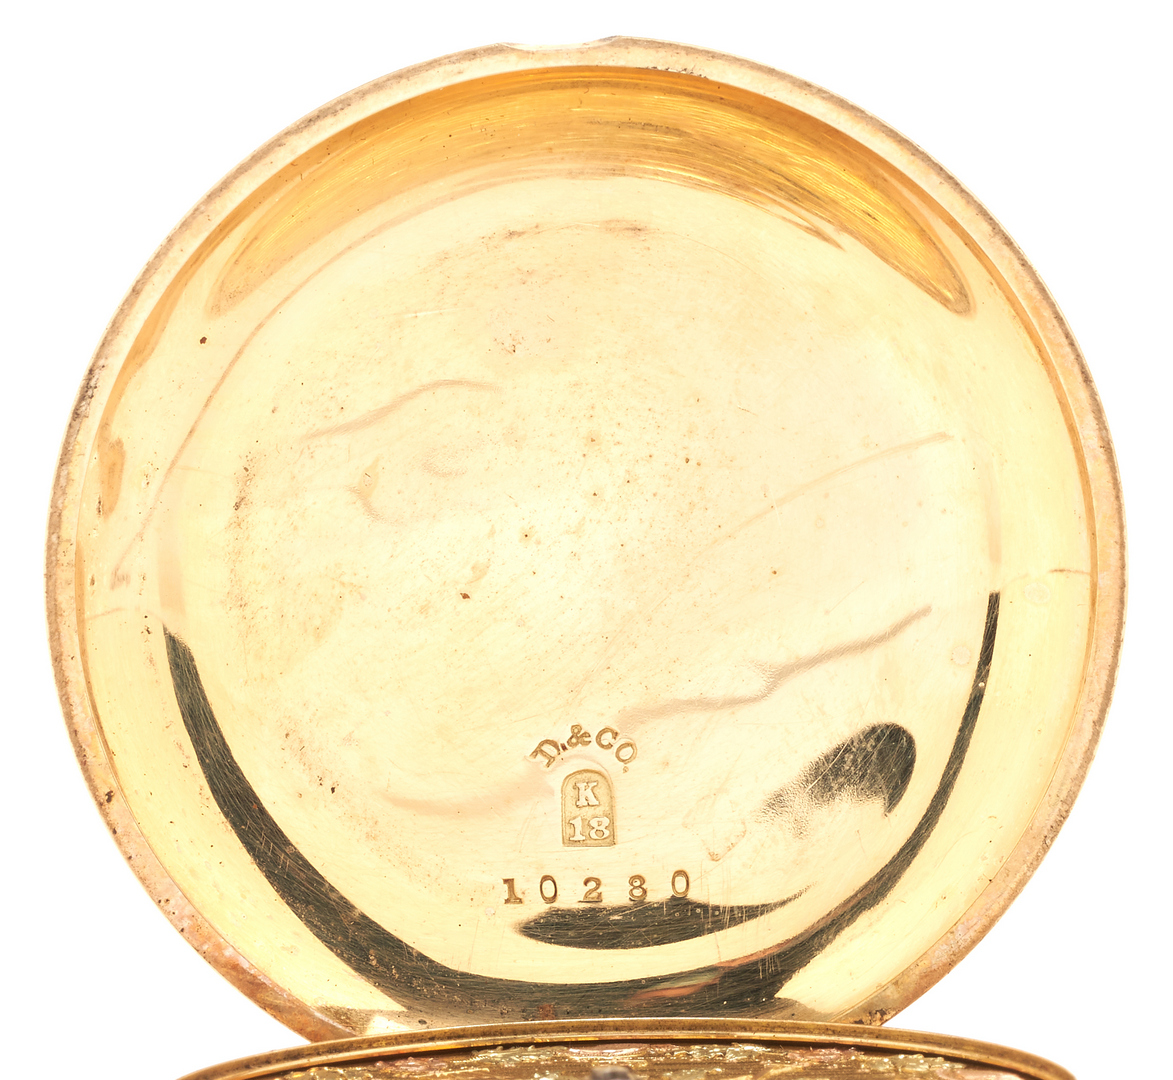 Lot 55: English Fusee Pocket Watch, 18K Gold Case